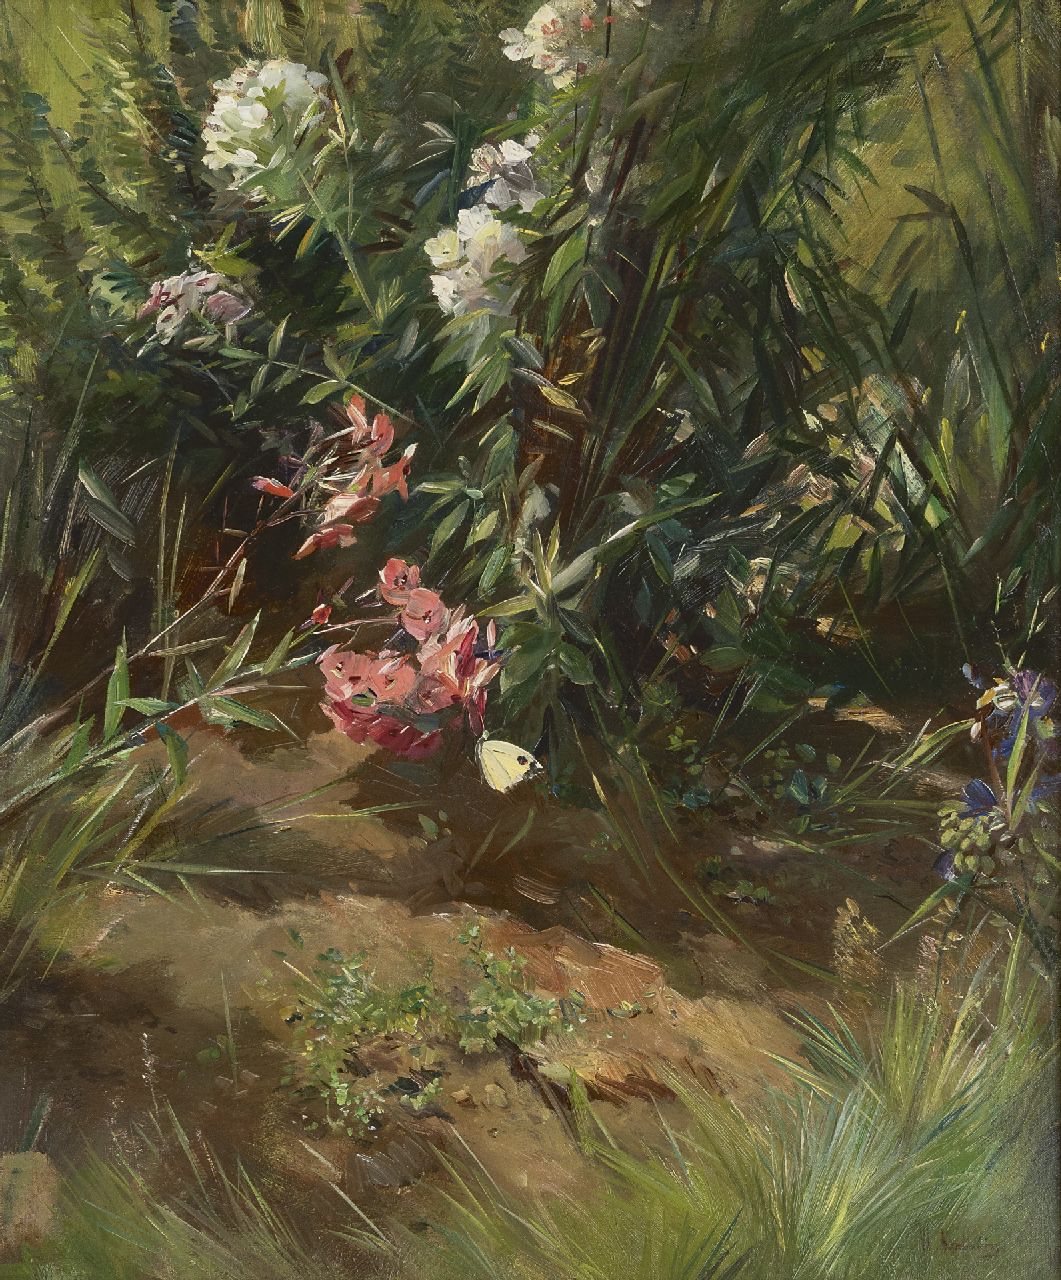 Willem Korteling | Flowering shrubs with a butterfly, oil on canvas, 60.2 x 50.2 cm, signed l.r.